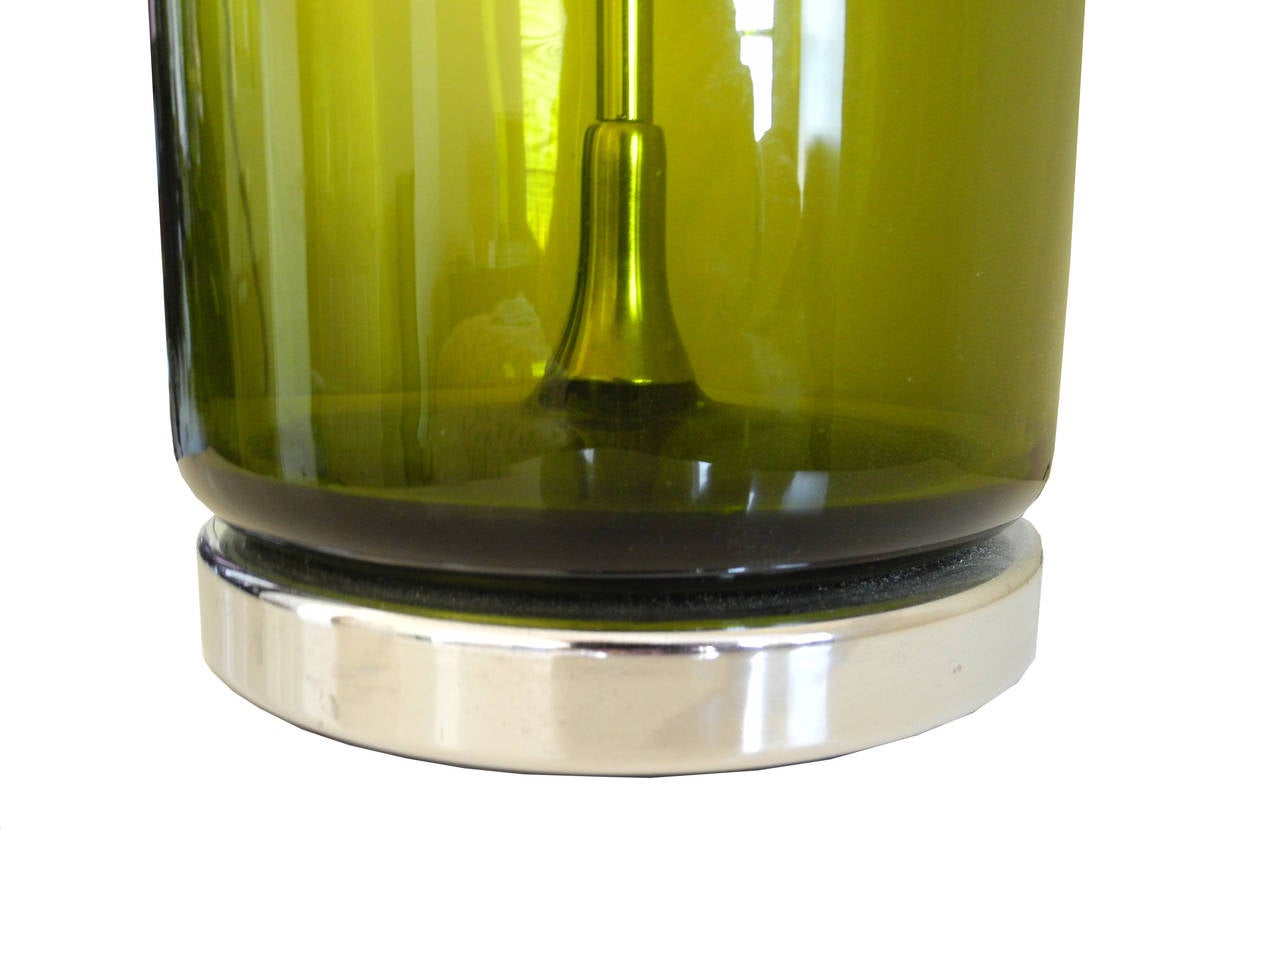 Mid-Century Modern 1970's Green Glass and Chrome Mod Lamp In Good Condition For Sale In Hudson, NY